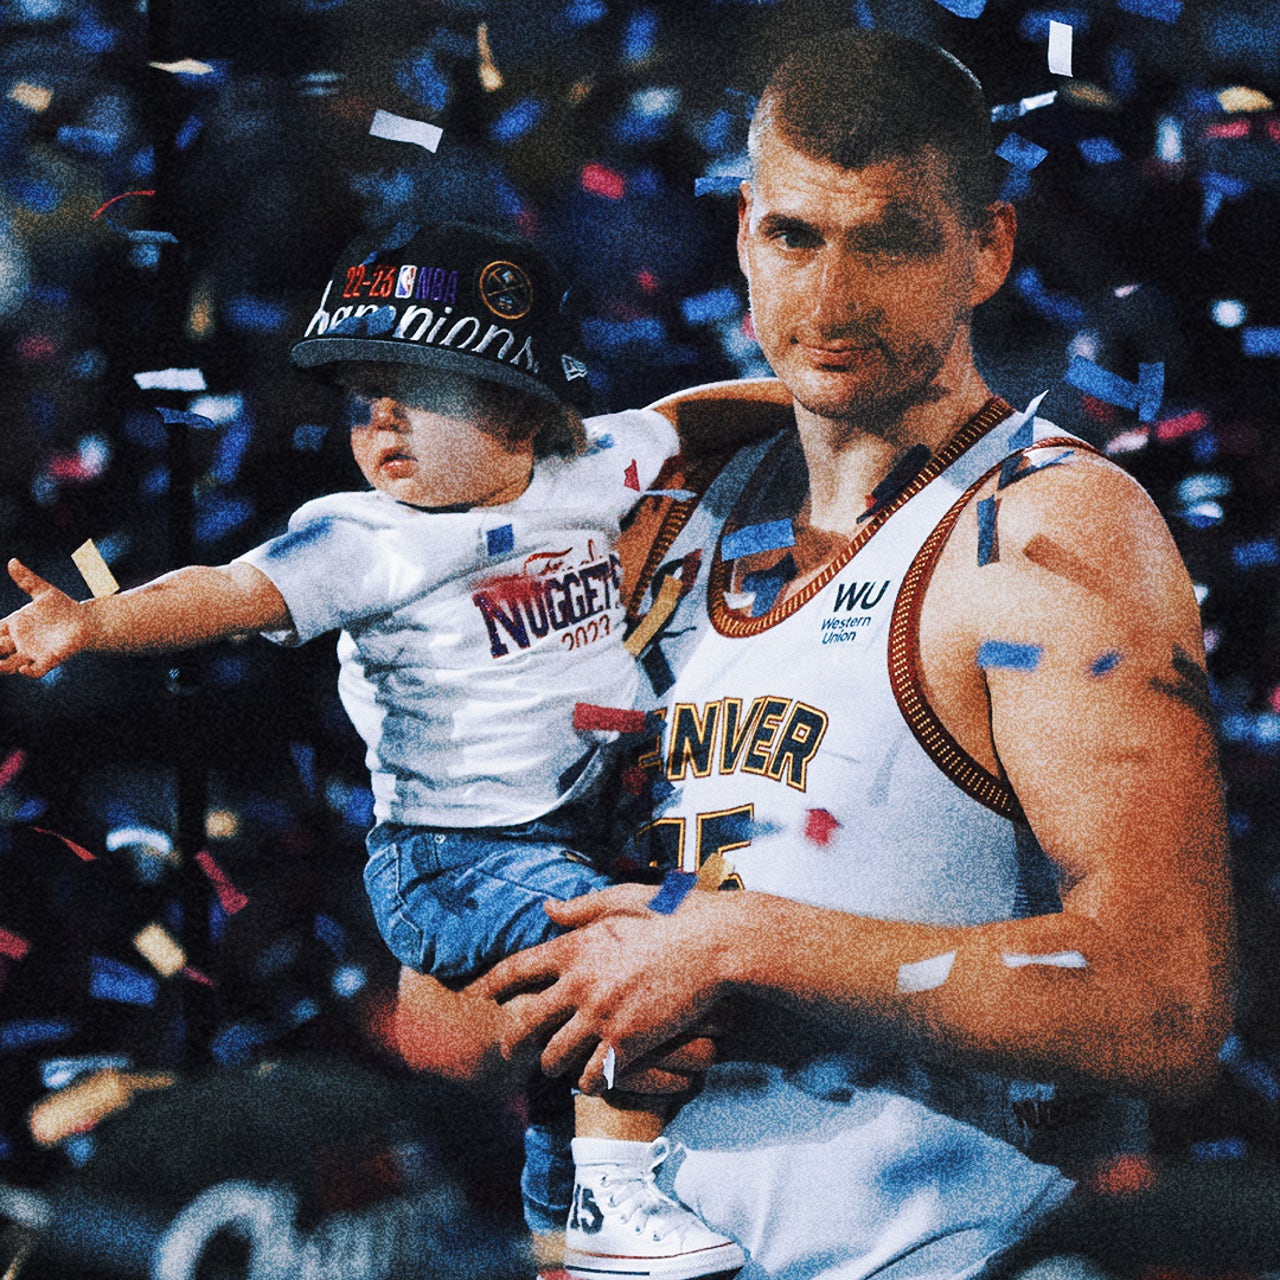 Watch: 2023 NBA Champion Nikola Jokic celebrates another trophy with his  horses in Serbia